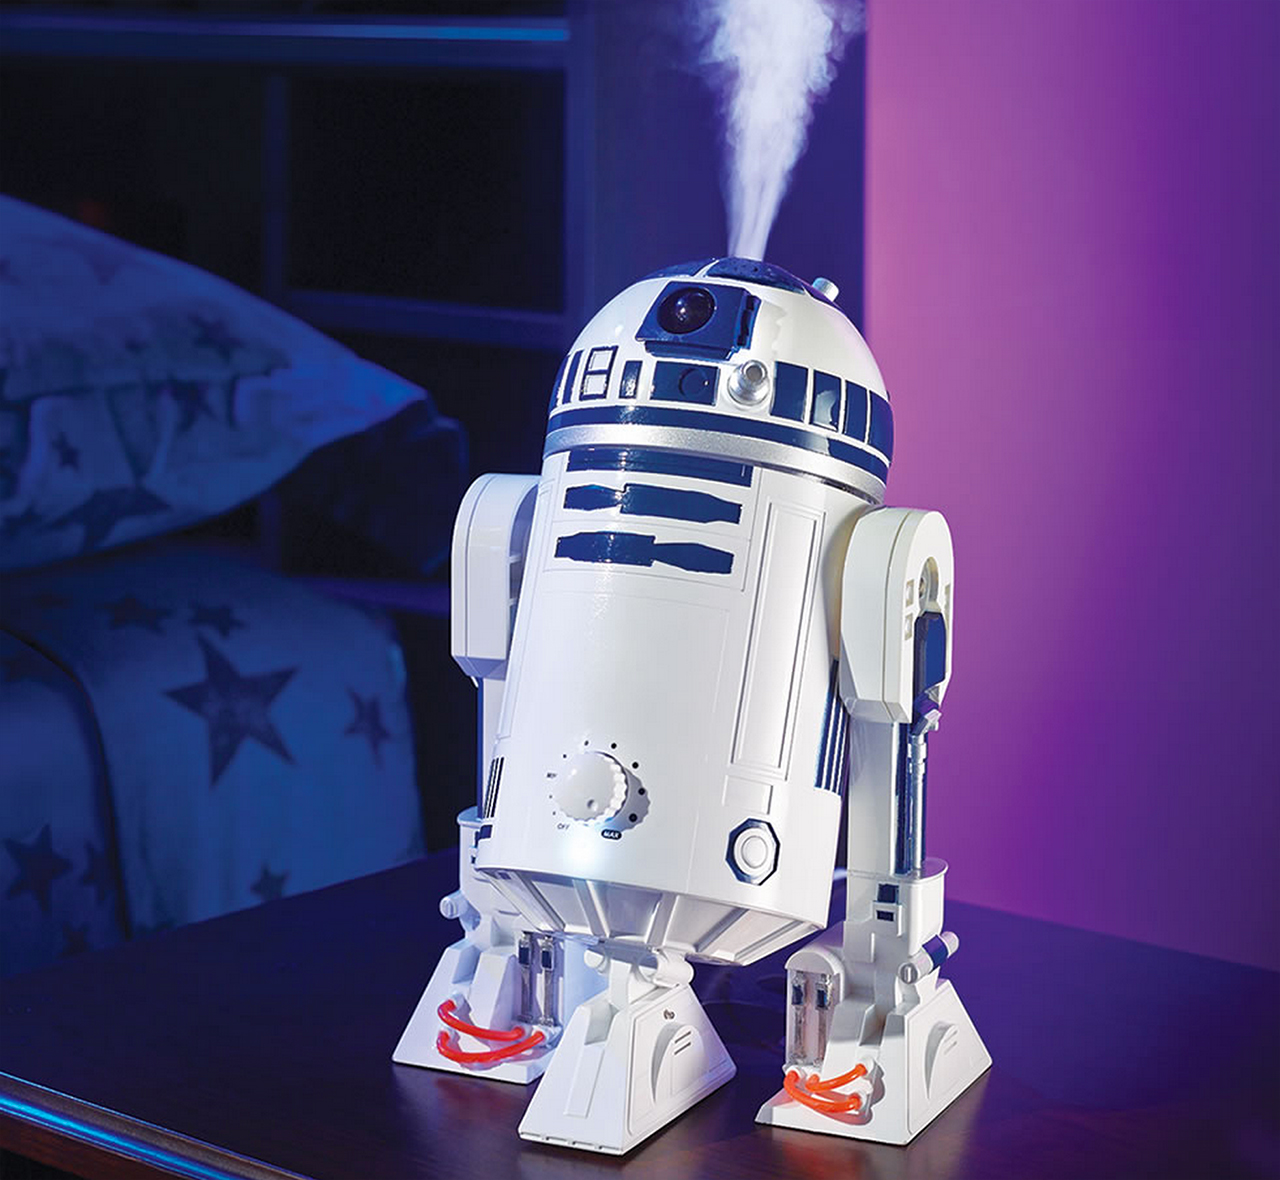 This R2-D2 Is Either Really Angry Or An Adorable Humidifier